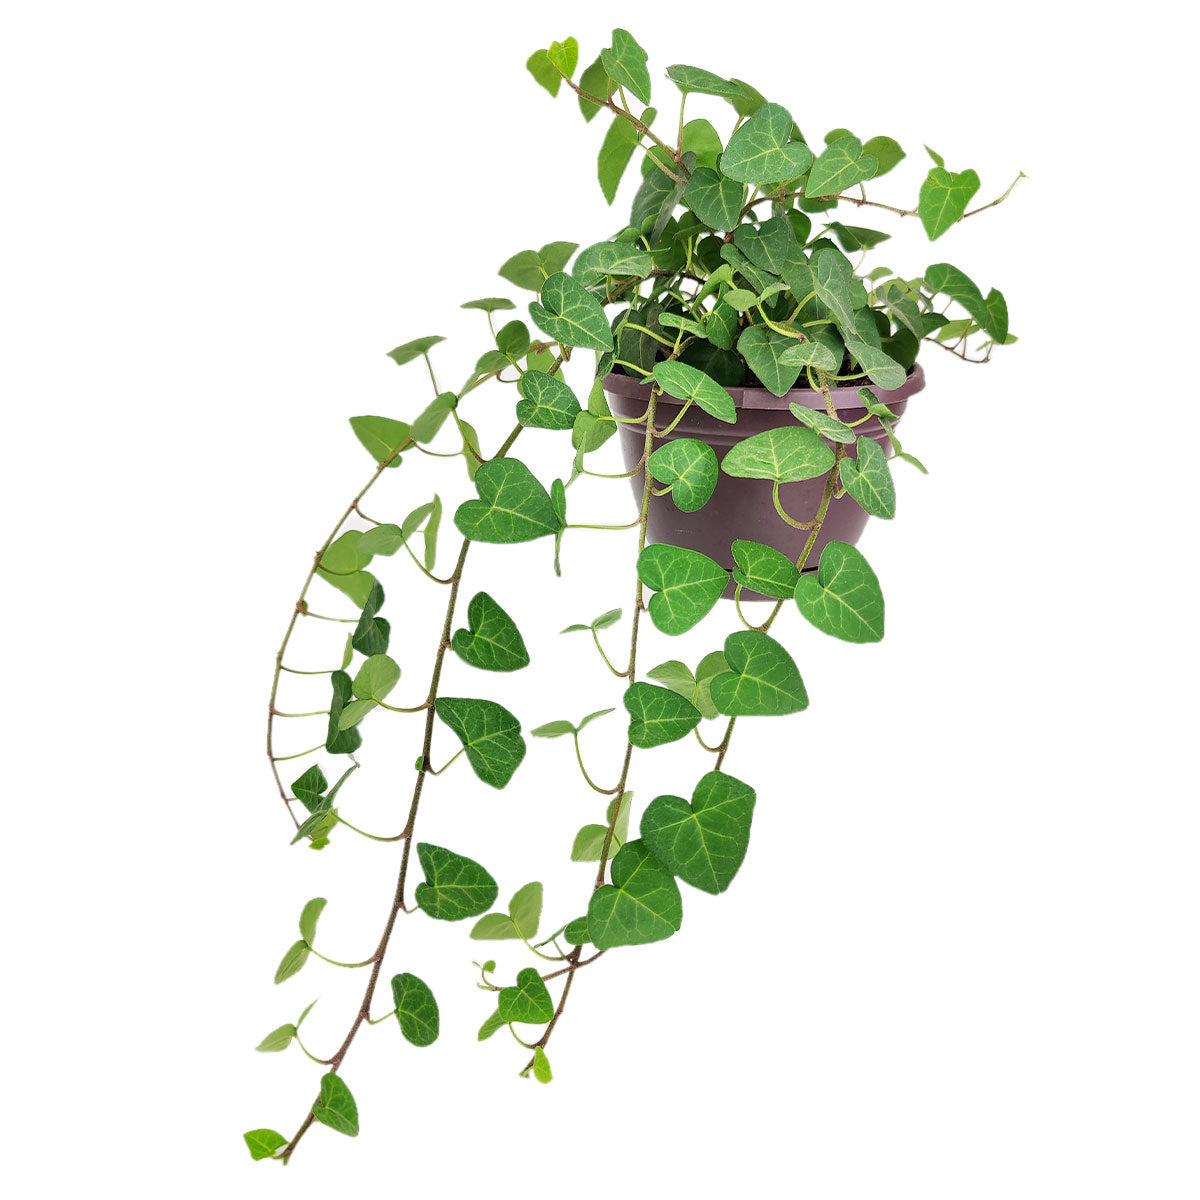 Ivy Hedera Plant, evergreen trailing plant, best houseplant for hanging baskets, easy care and low light plant